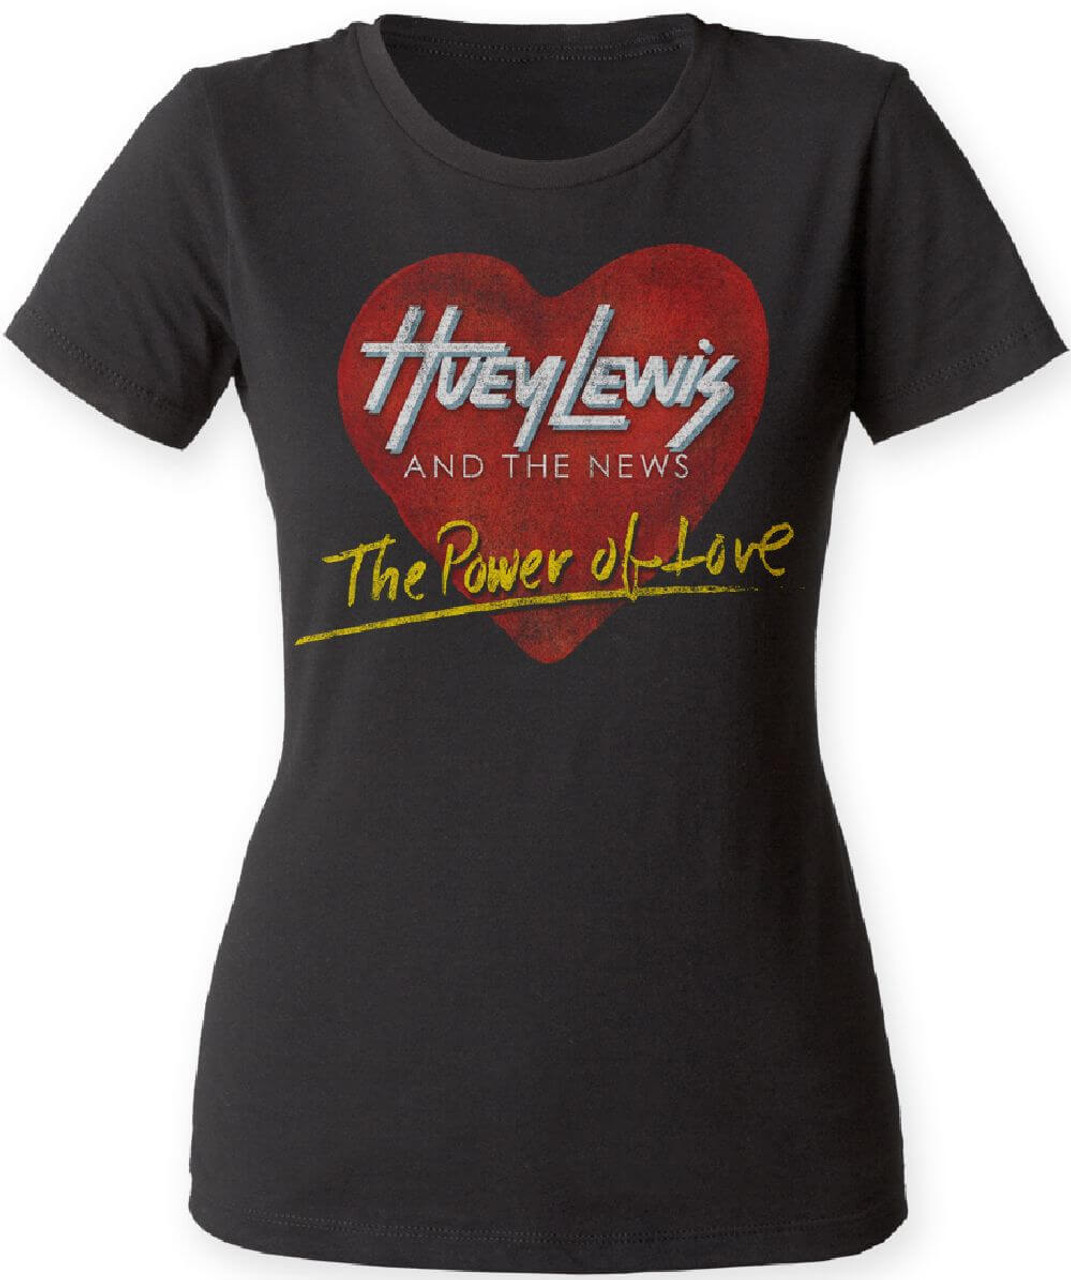 The power of love huey lewis